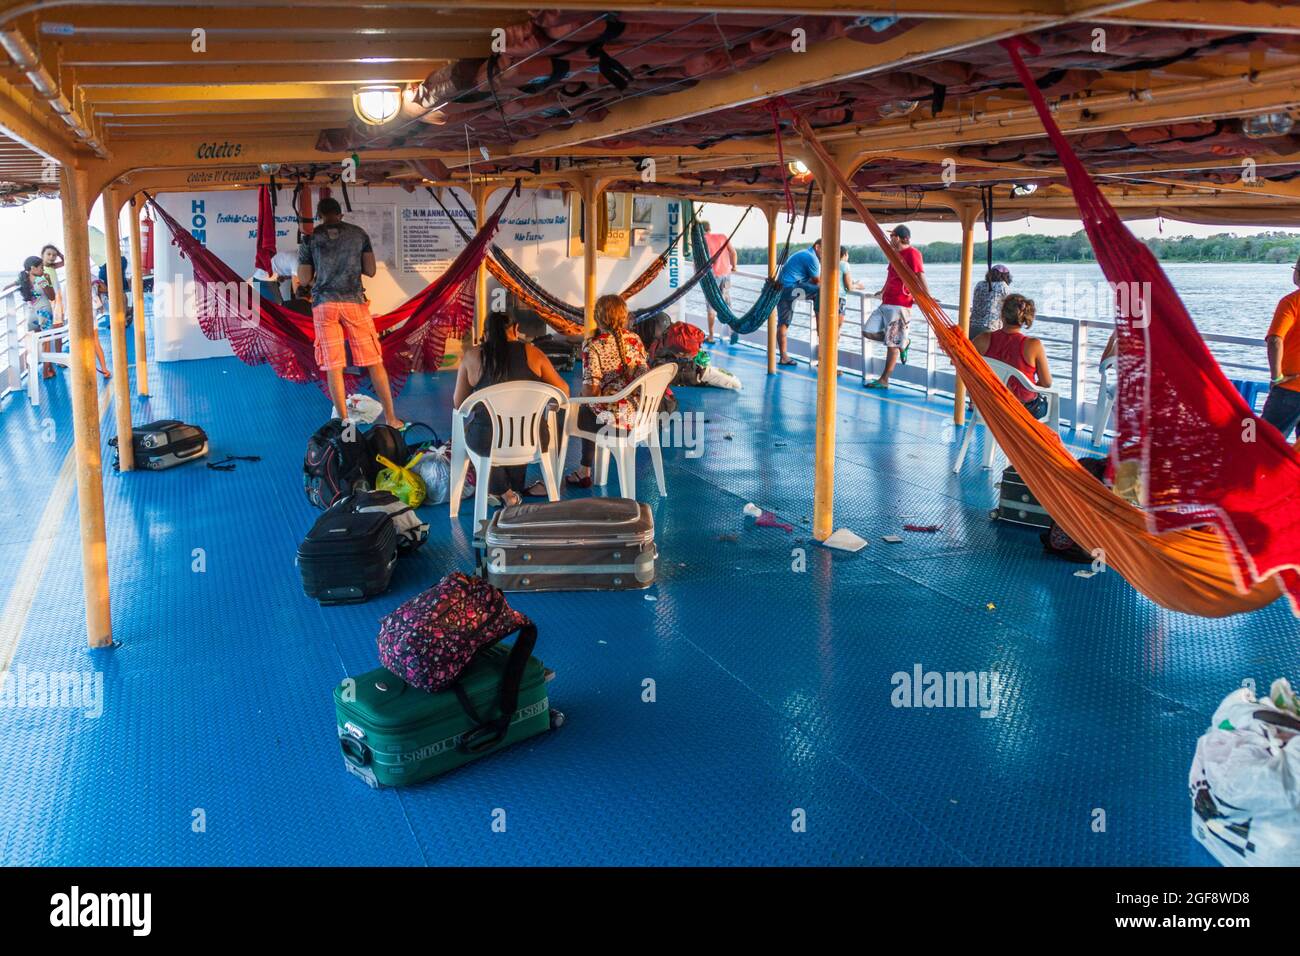 AMAZON, BRAZIL - JUNE 28, 2015: Pople are leaving the hammock deck at the boat Anna Karoline II which plies river Amazon between Santarem and Manaus, Stock Photo